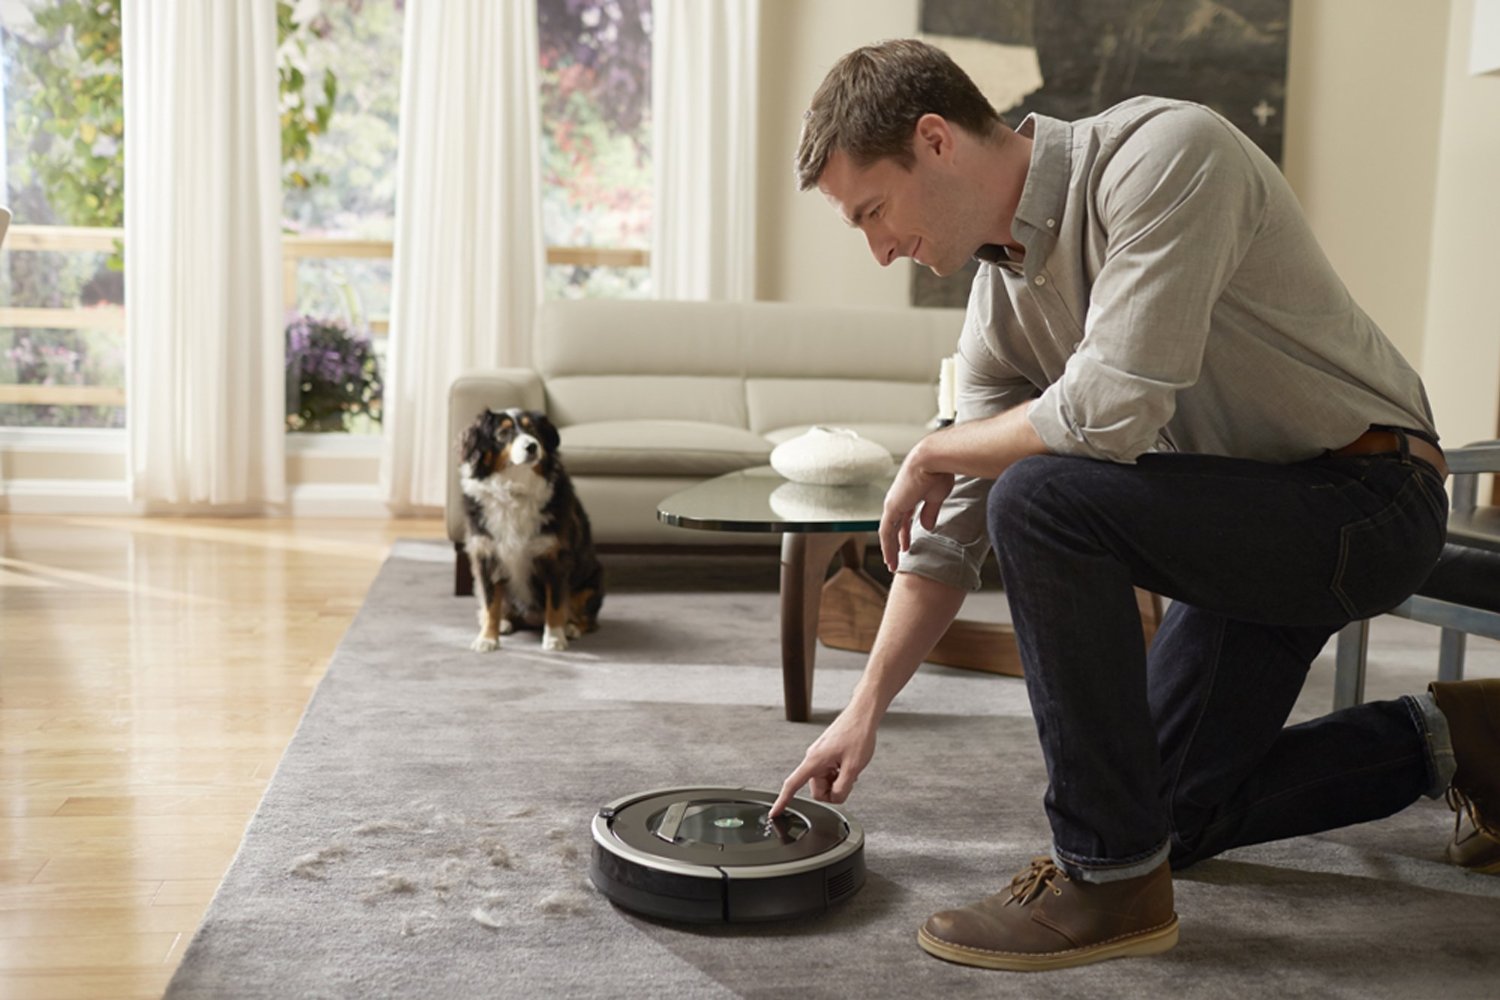 Save 30% on the iRobot Roomba 870 Vacuum Cleaner Robot! Just $419.00!